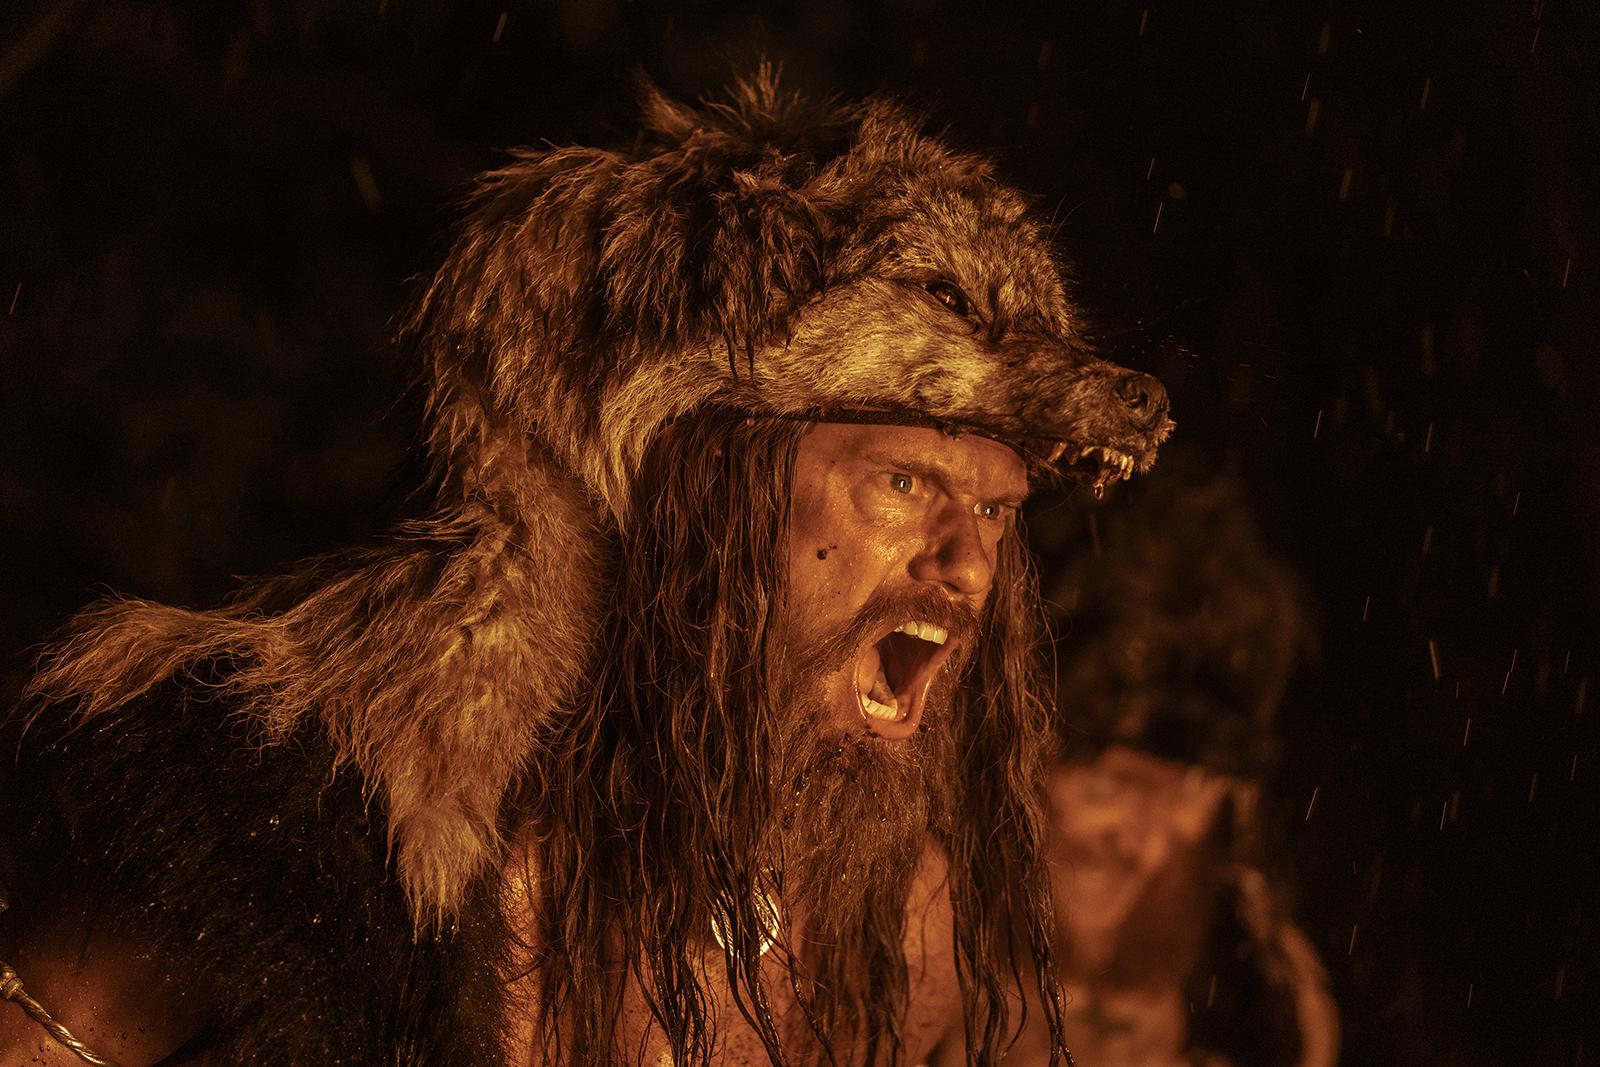 “The Northman” is a wild tale of Viking folklore